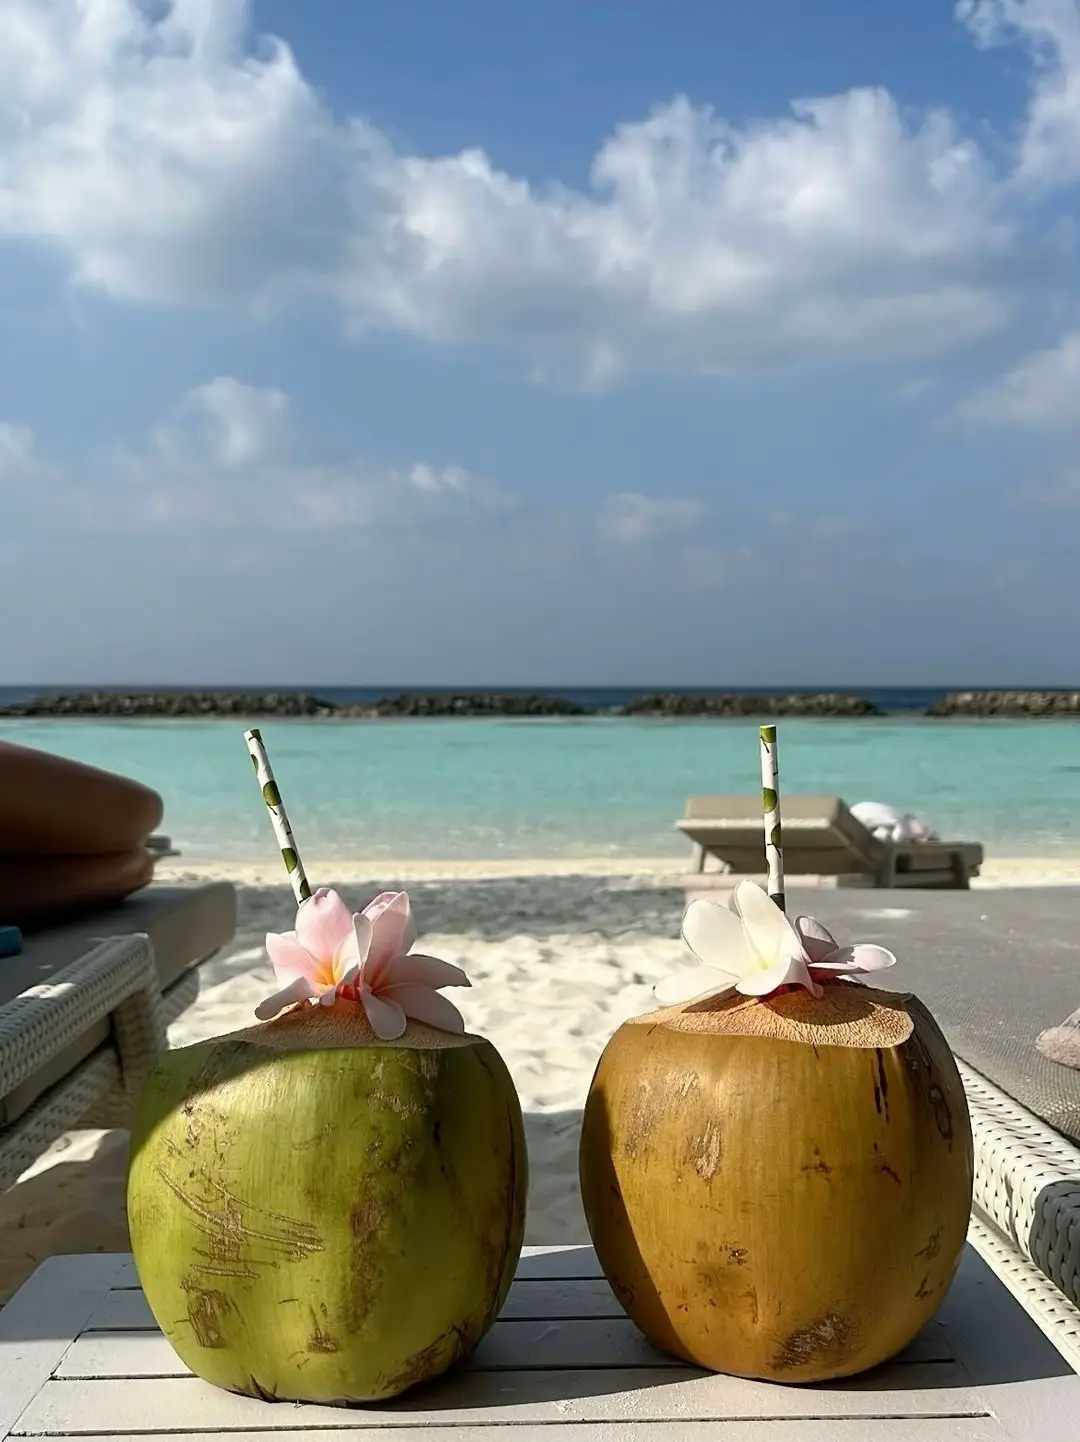  Two coconuts with water in them.